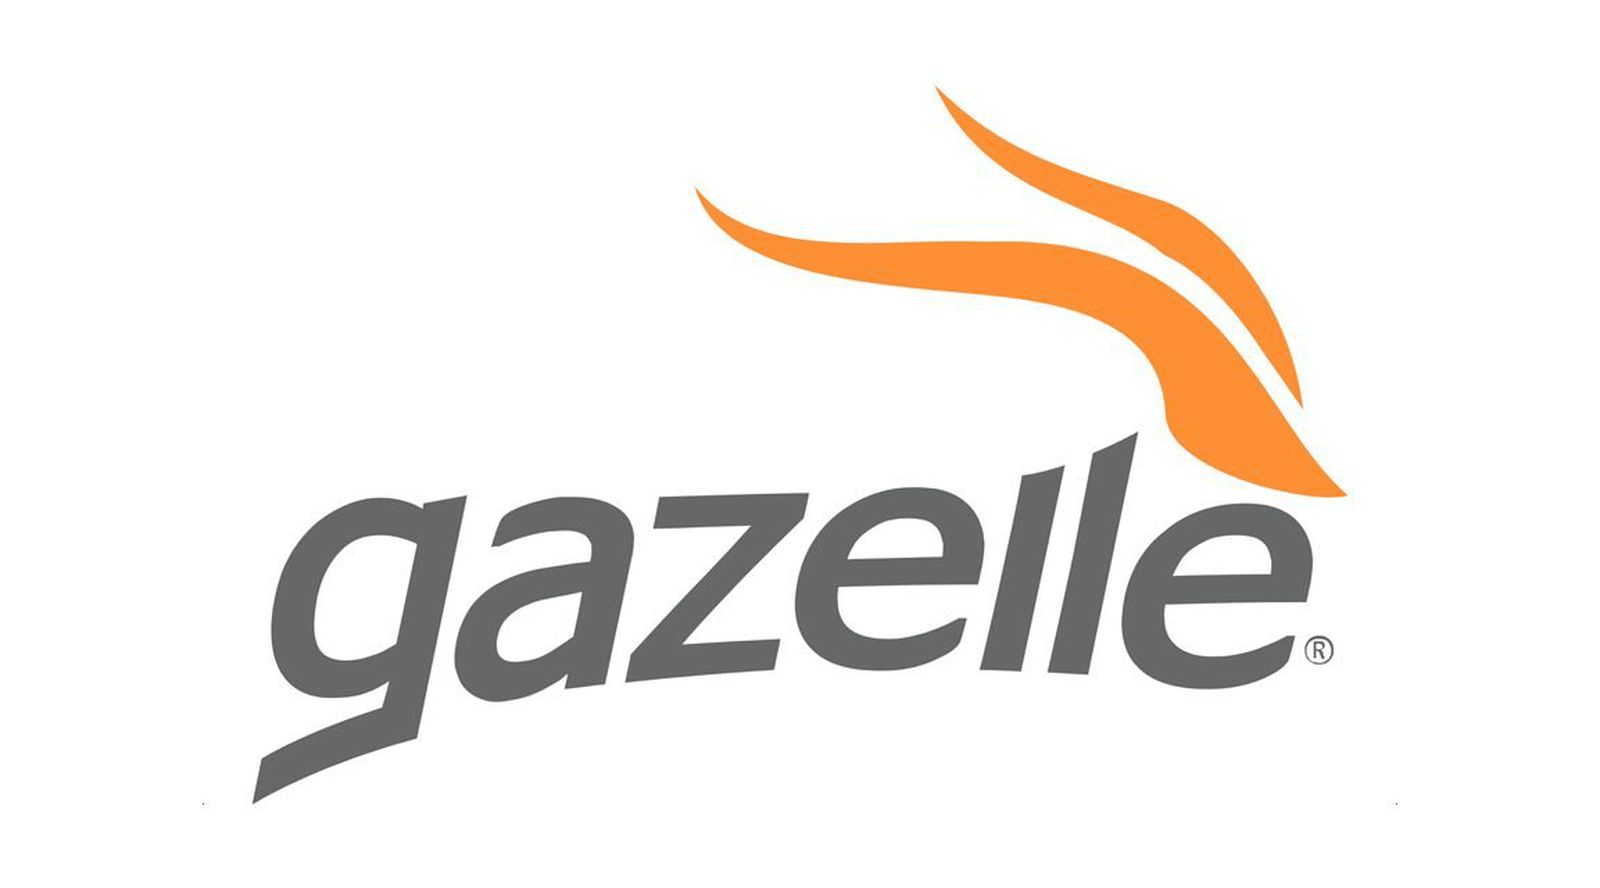 The device exchange program used by Gazelle will end next year